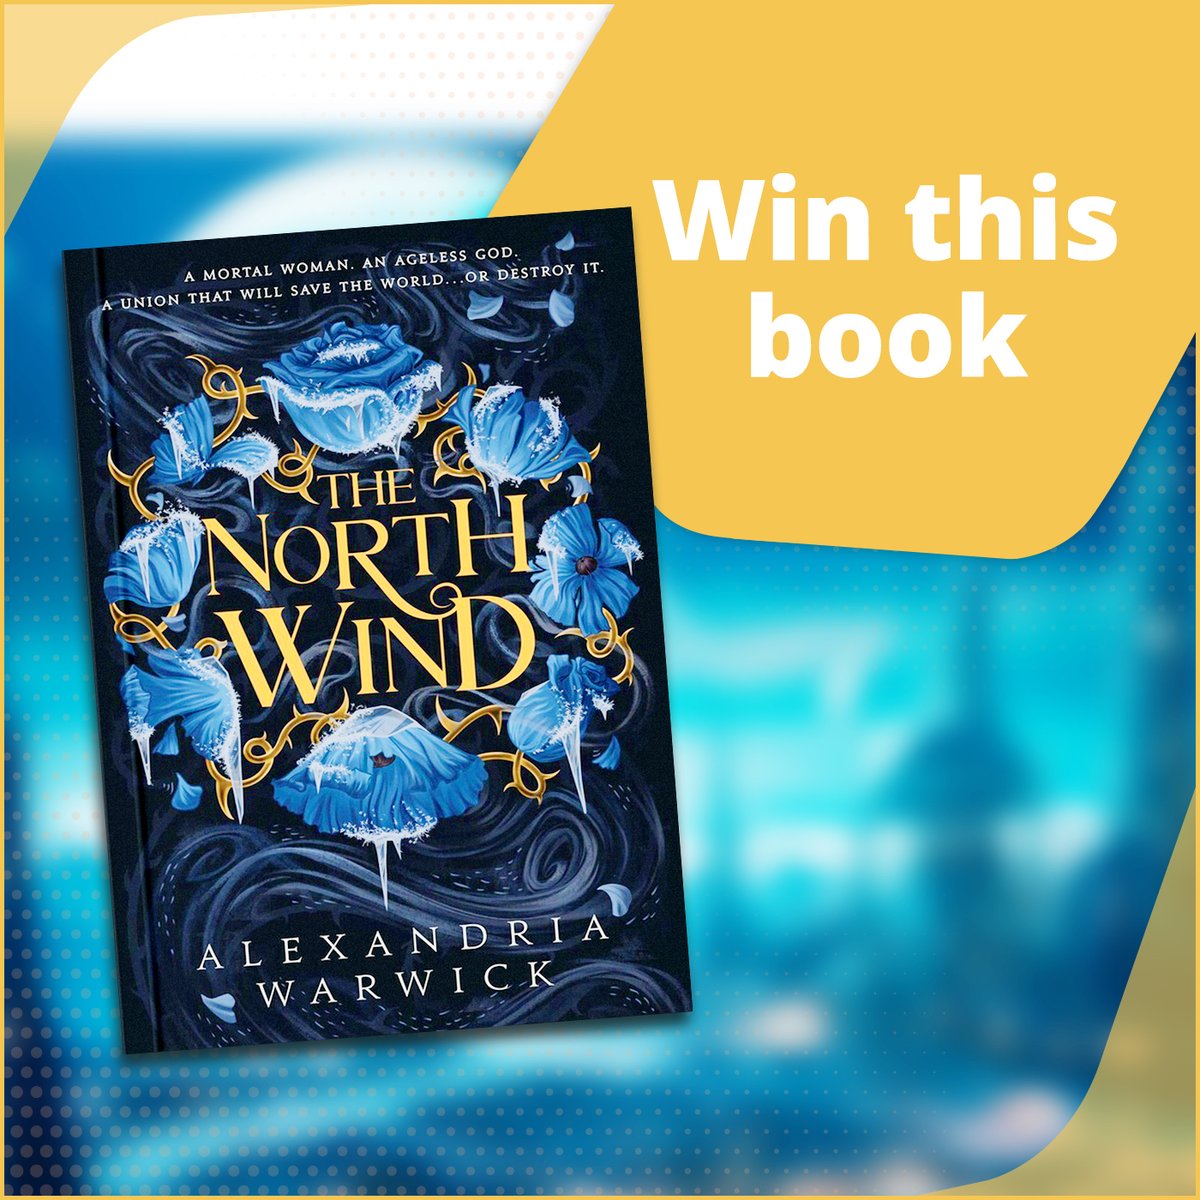 WIN THIS BOOK – This week, we’re giving away three copies of The North Wind by Alexandra Warwick, author of the Four Winds series. To win, enter here: writerscentre.com.au/win